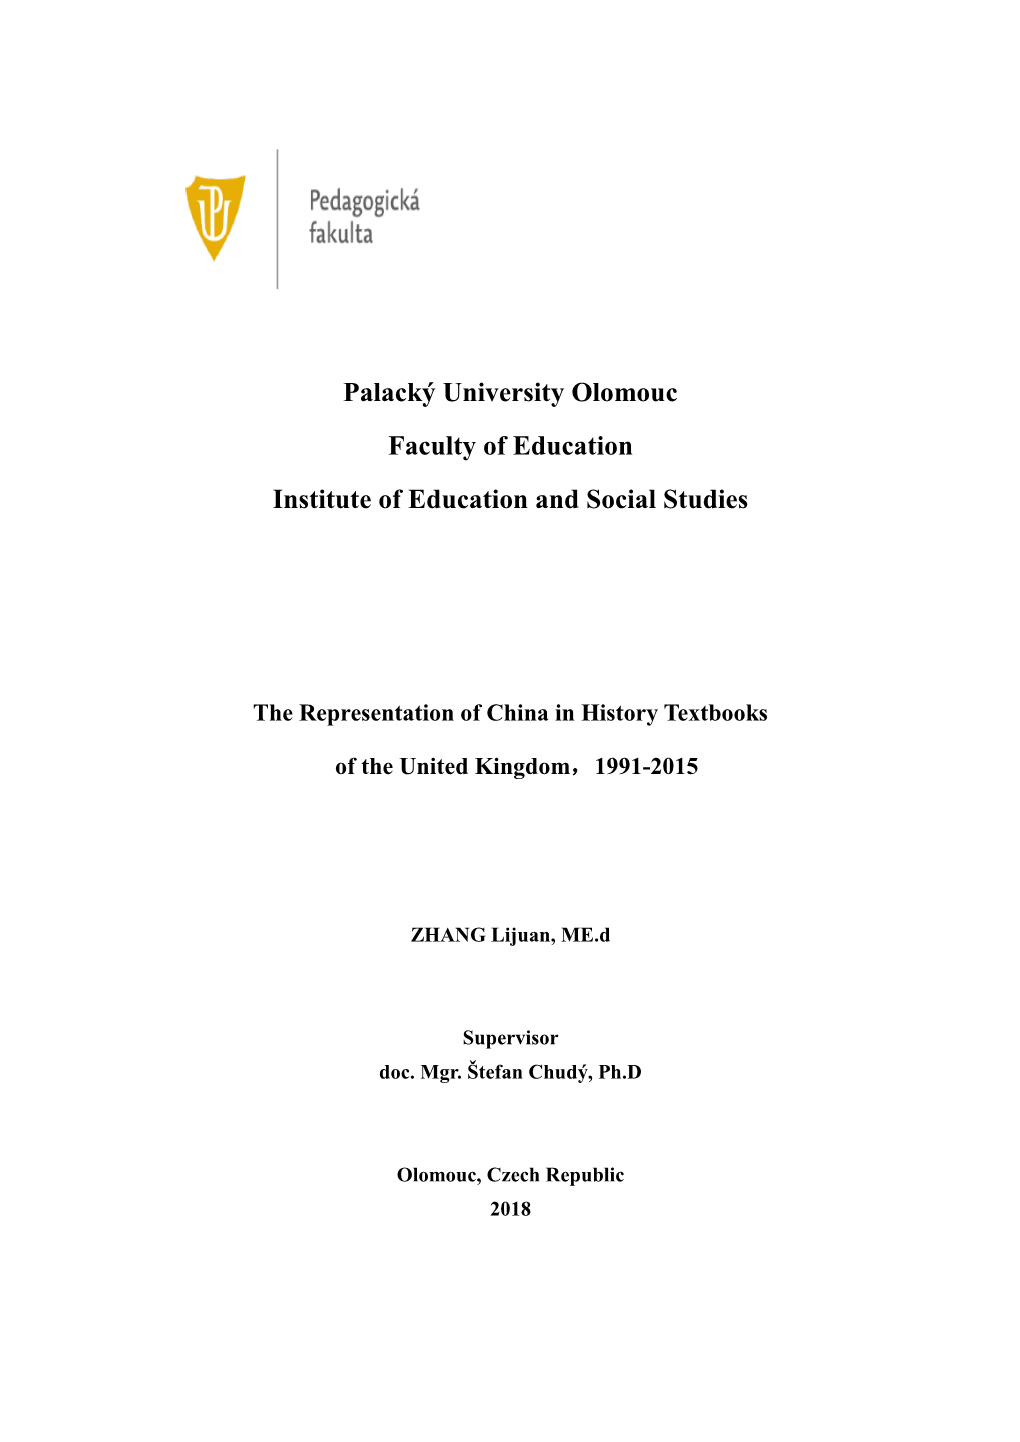 Palacký University Olomouc Faculty of Education Institute of Education and Social Studies